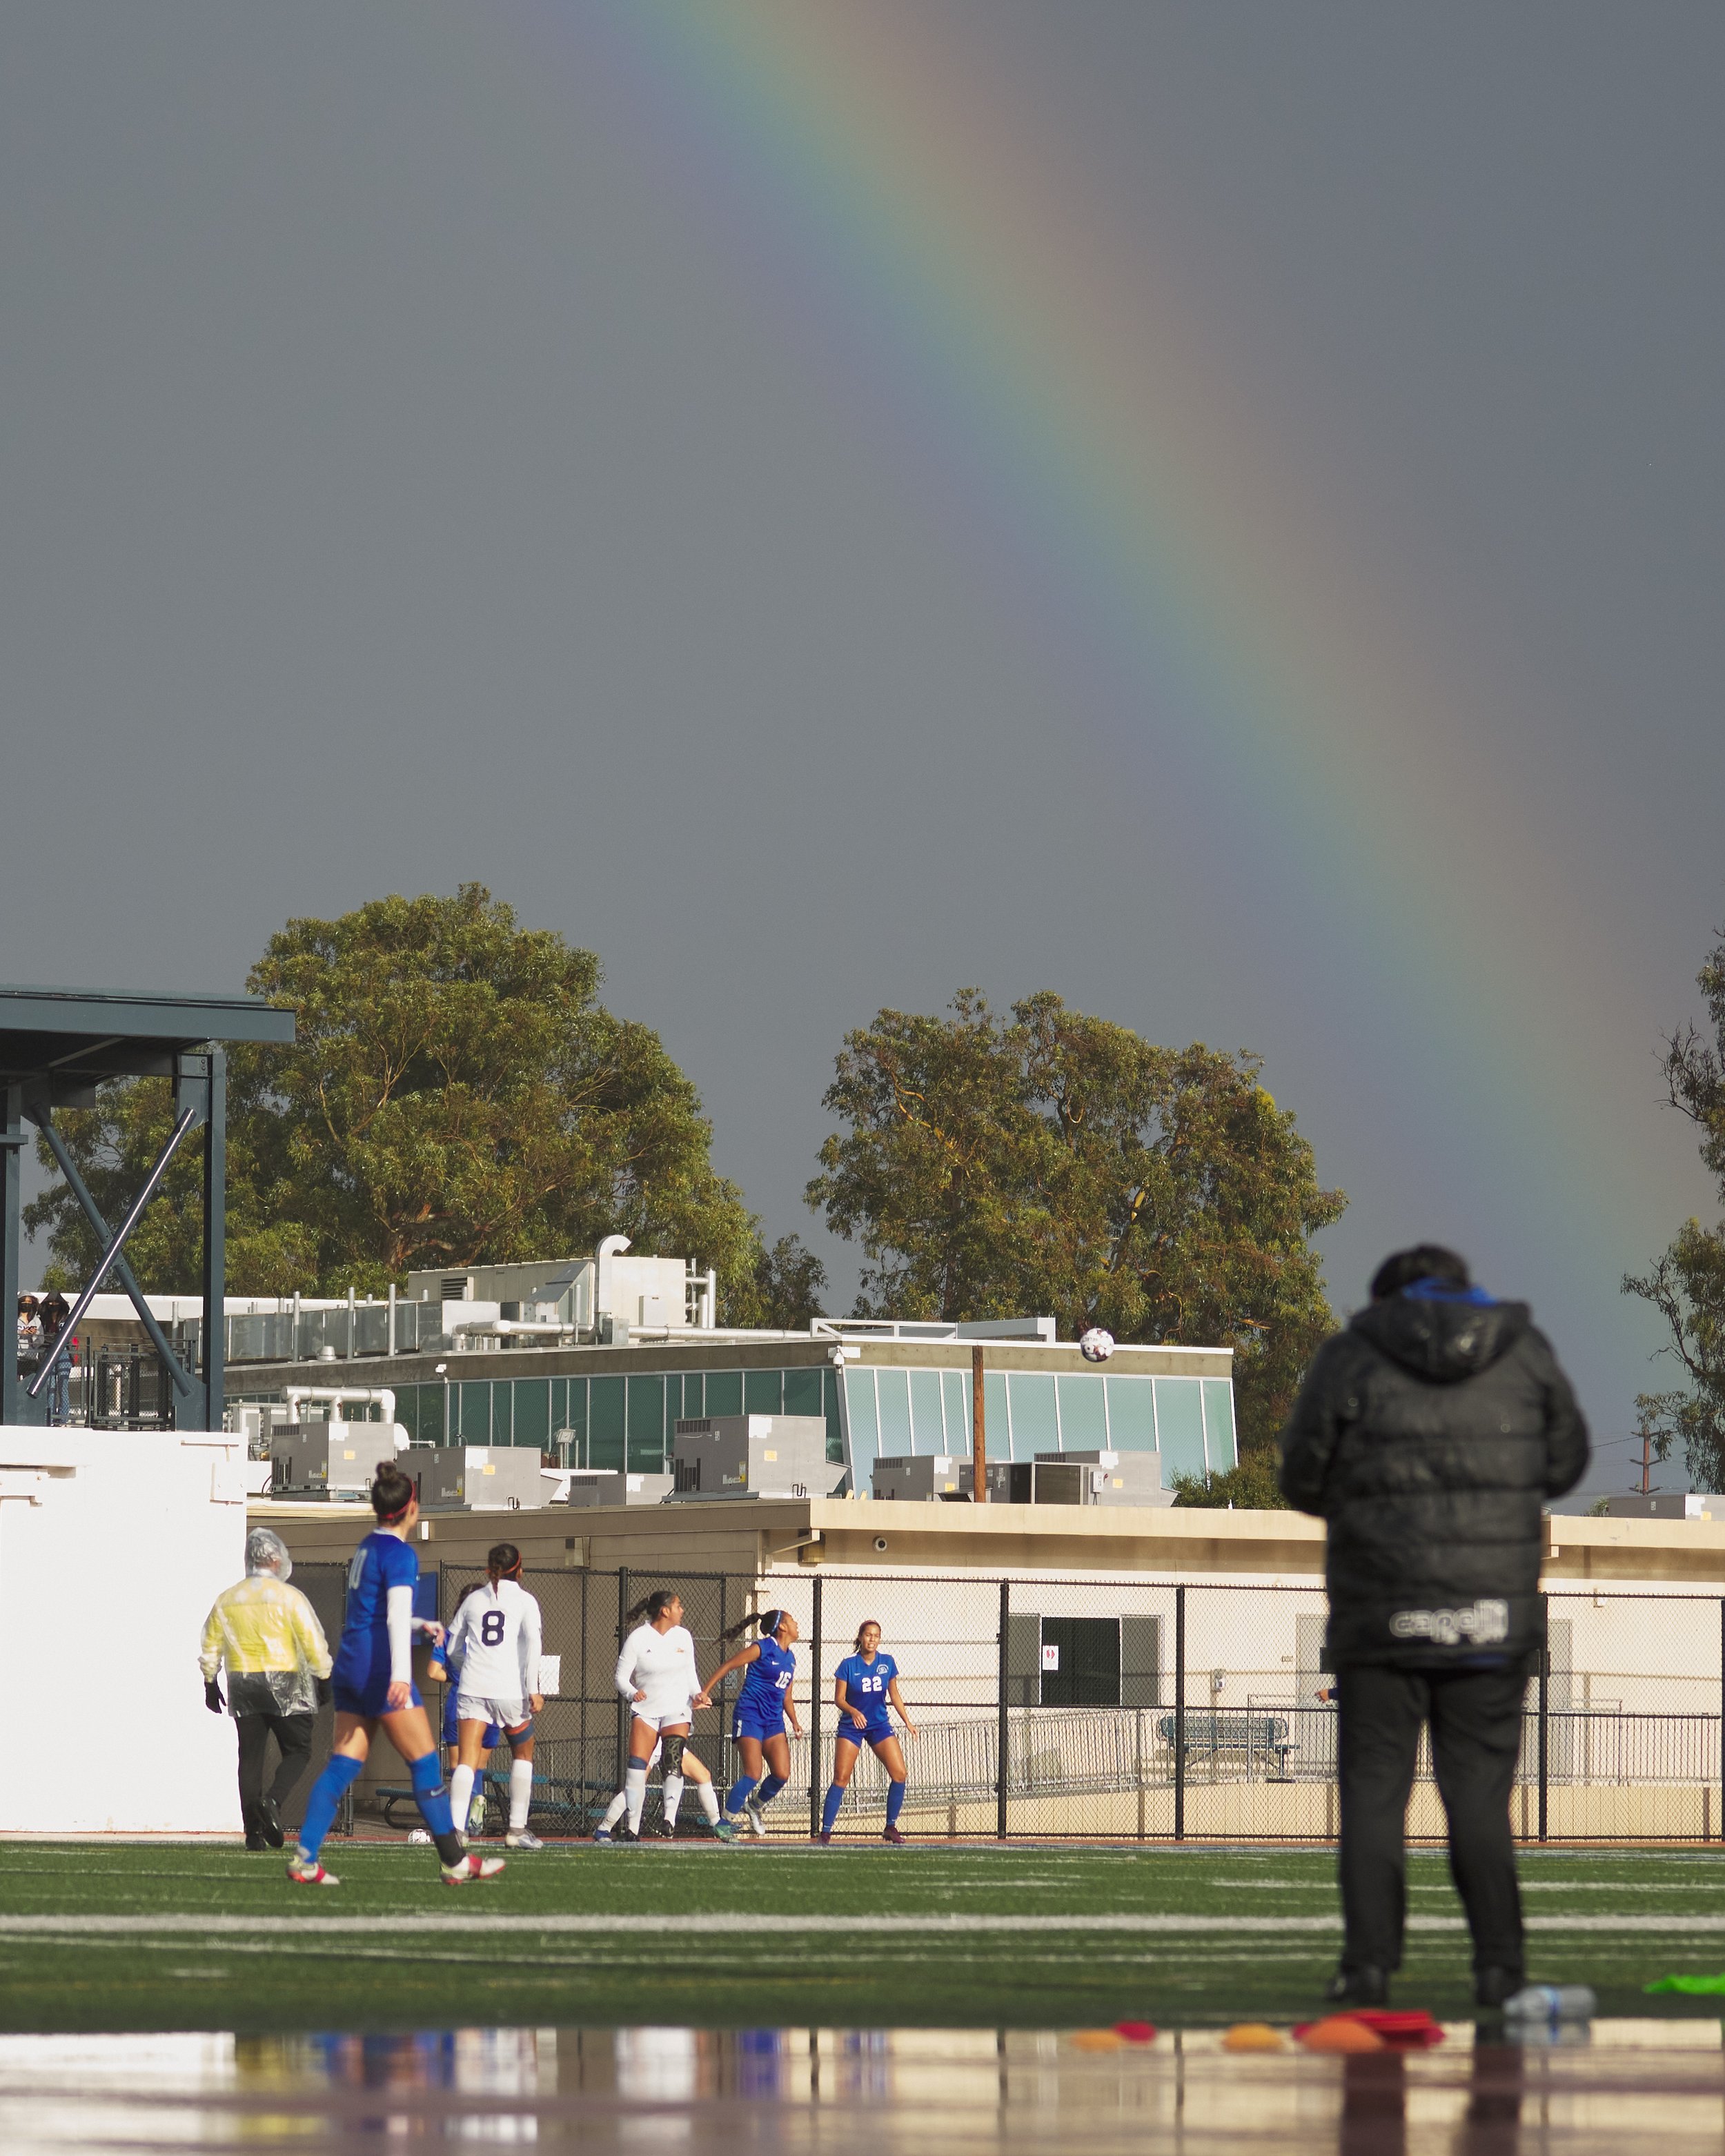  A rainbow briefly appears during the women's soccer match between the Santa Monica College Corsairs and the Citrus College Owls on Tuesday, Nov. 8, 2022, at Corsair Field in Santa Monica, Calif. The Corsairs won 3-1. (Nicholas McCall | The Corsair) 